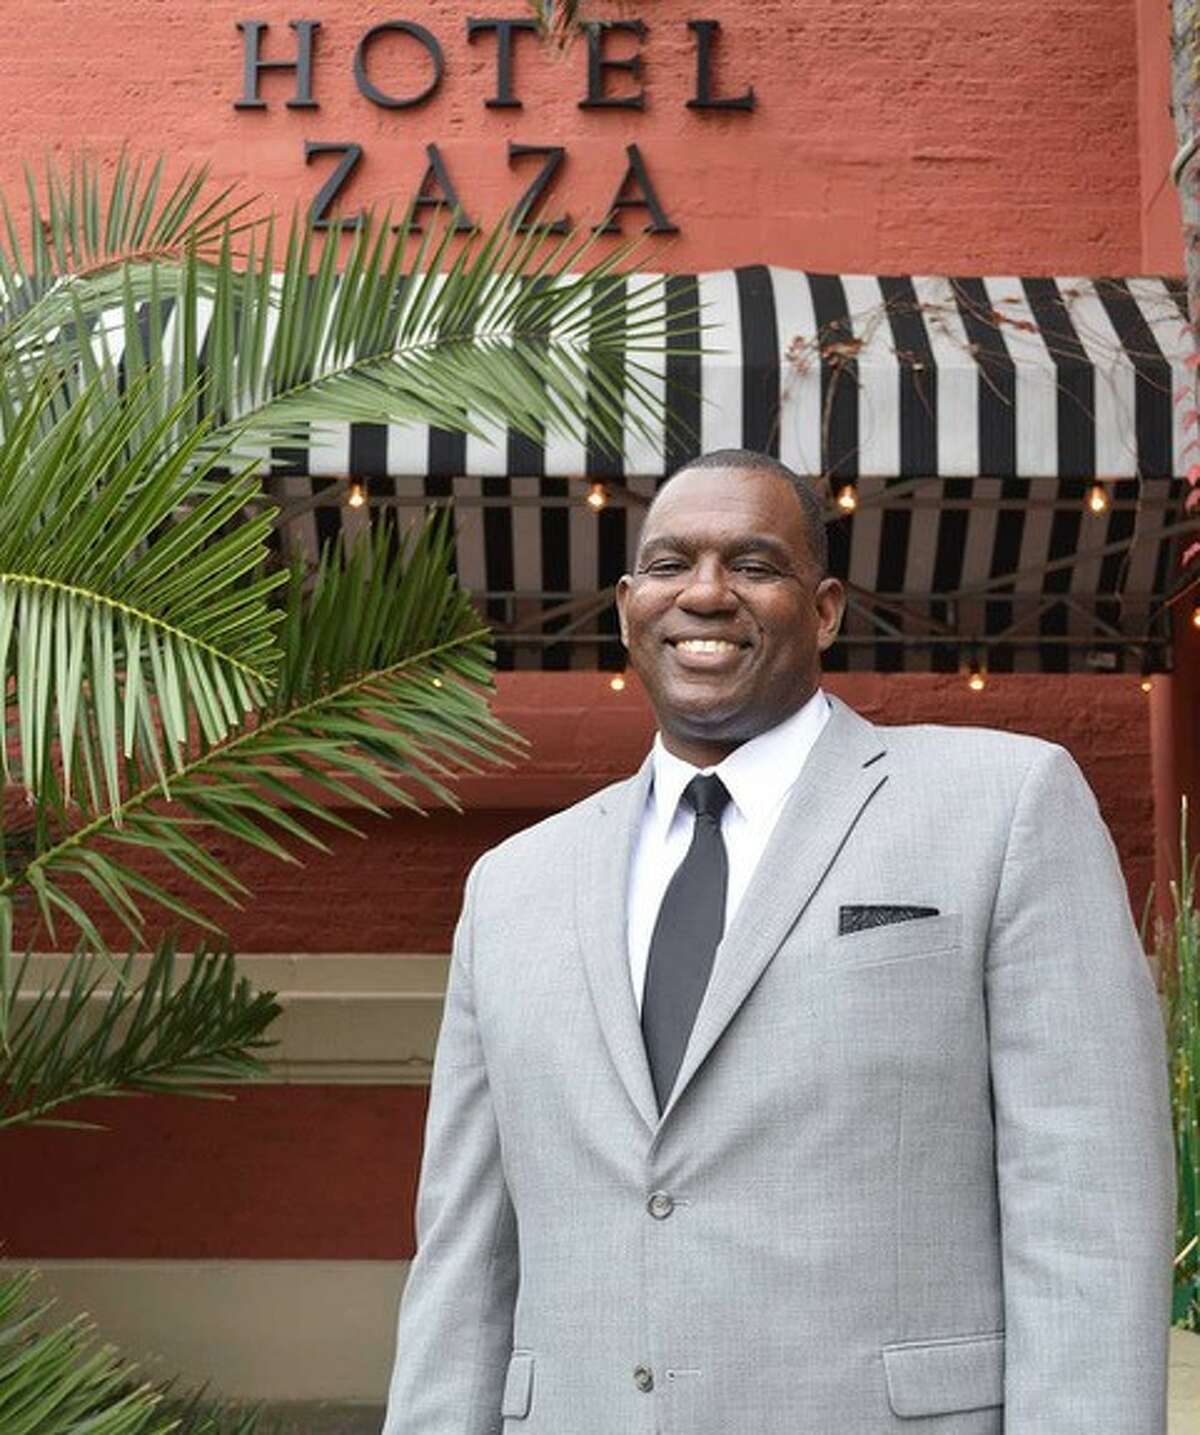 Z Resorts Management, the management company for the Hotel ZaZa brand, has named Ian Bush as the general manager at the new Hotel ZaZa Memorial City. The hotel is scheduled to open December 2017.